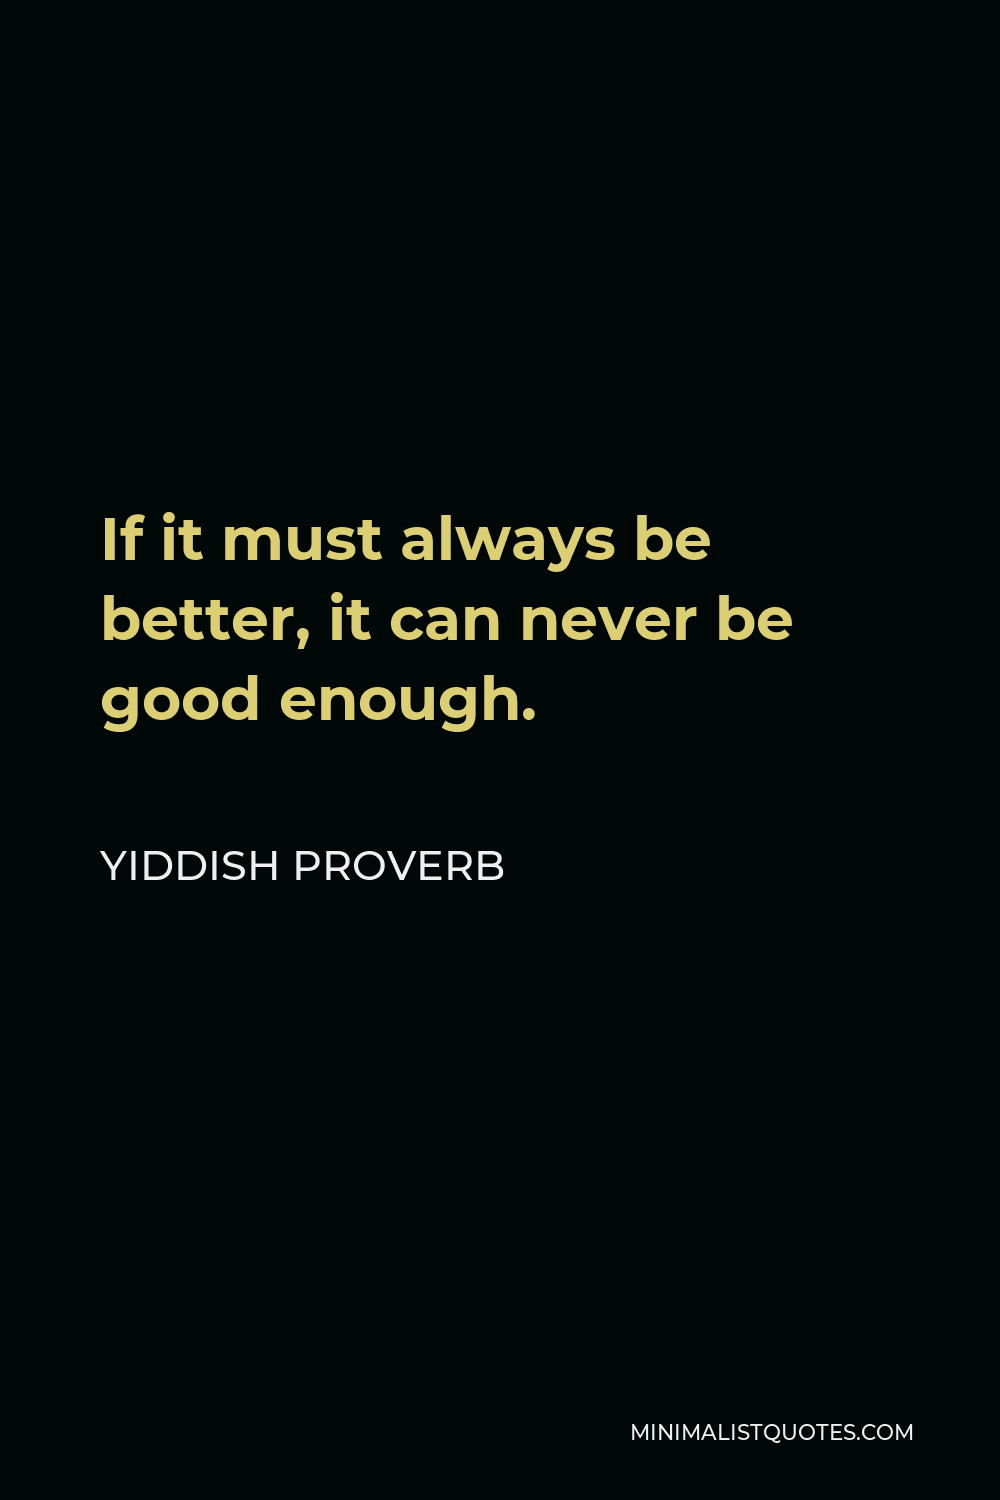 Yiddish Proverb Quote - If it must always be better, it can never be good enough.